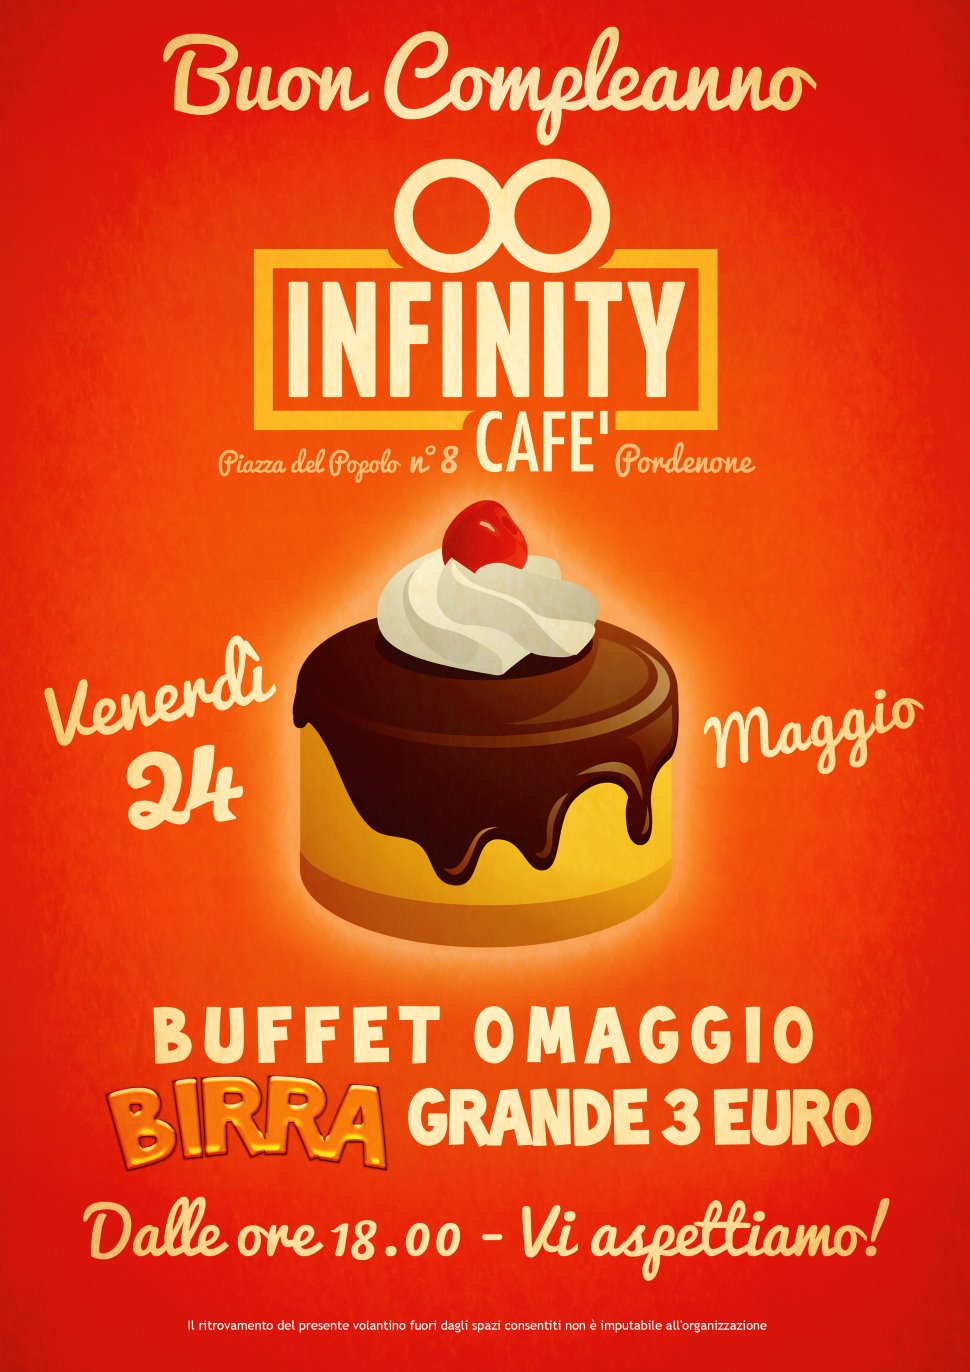 Buon Compleanno Infinity